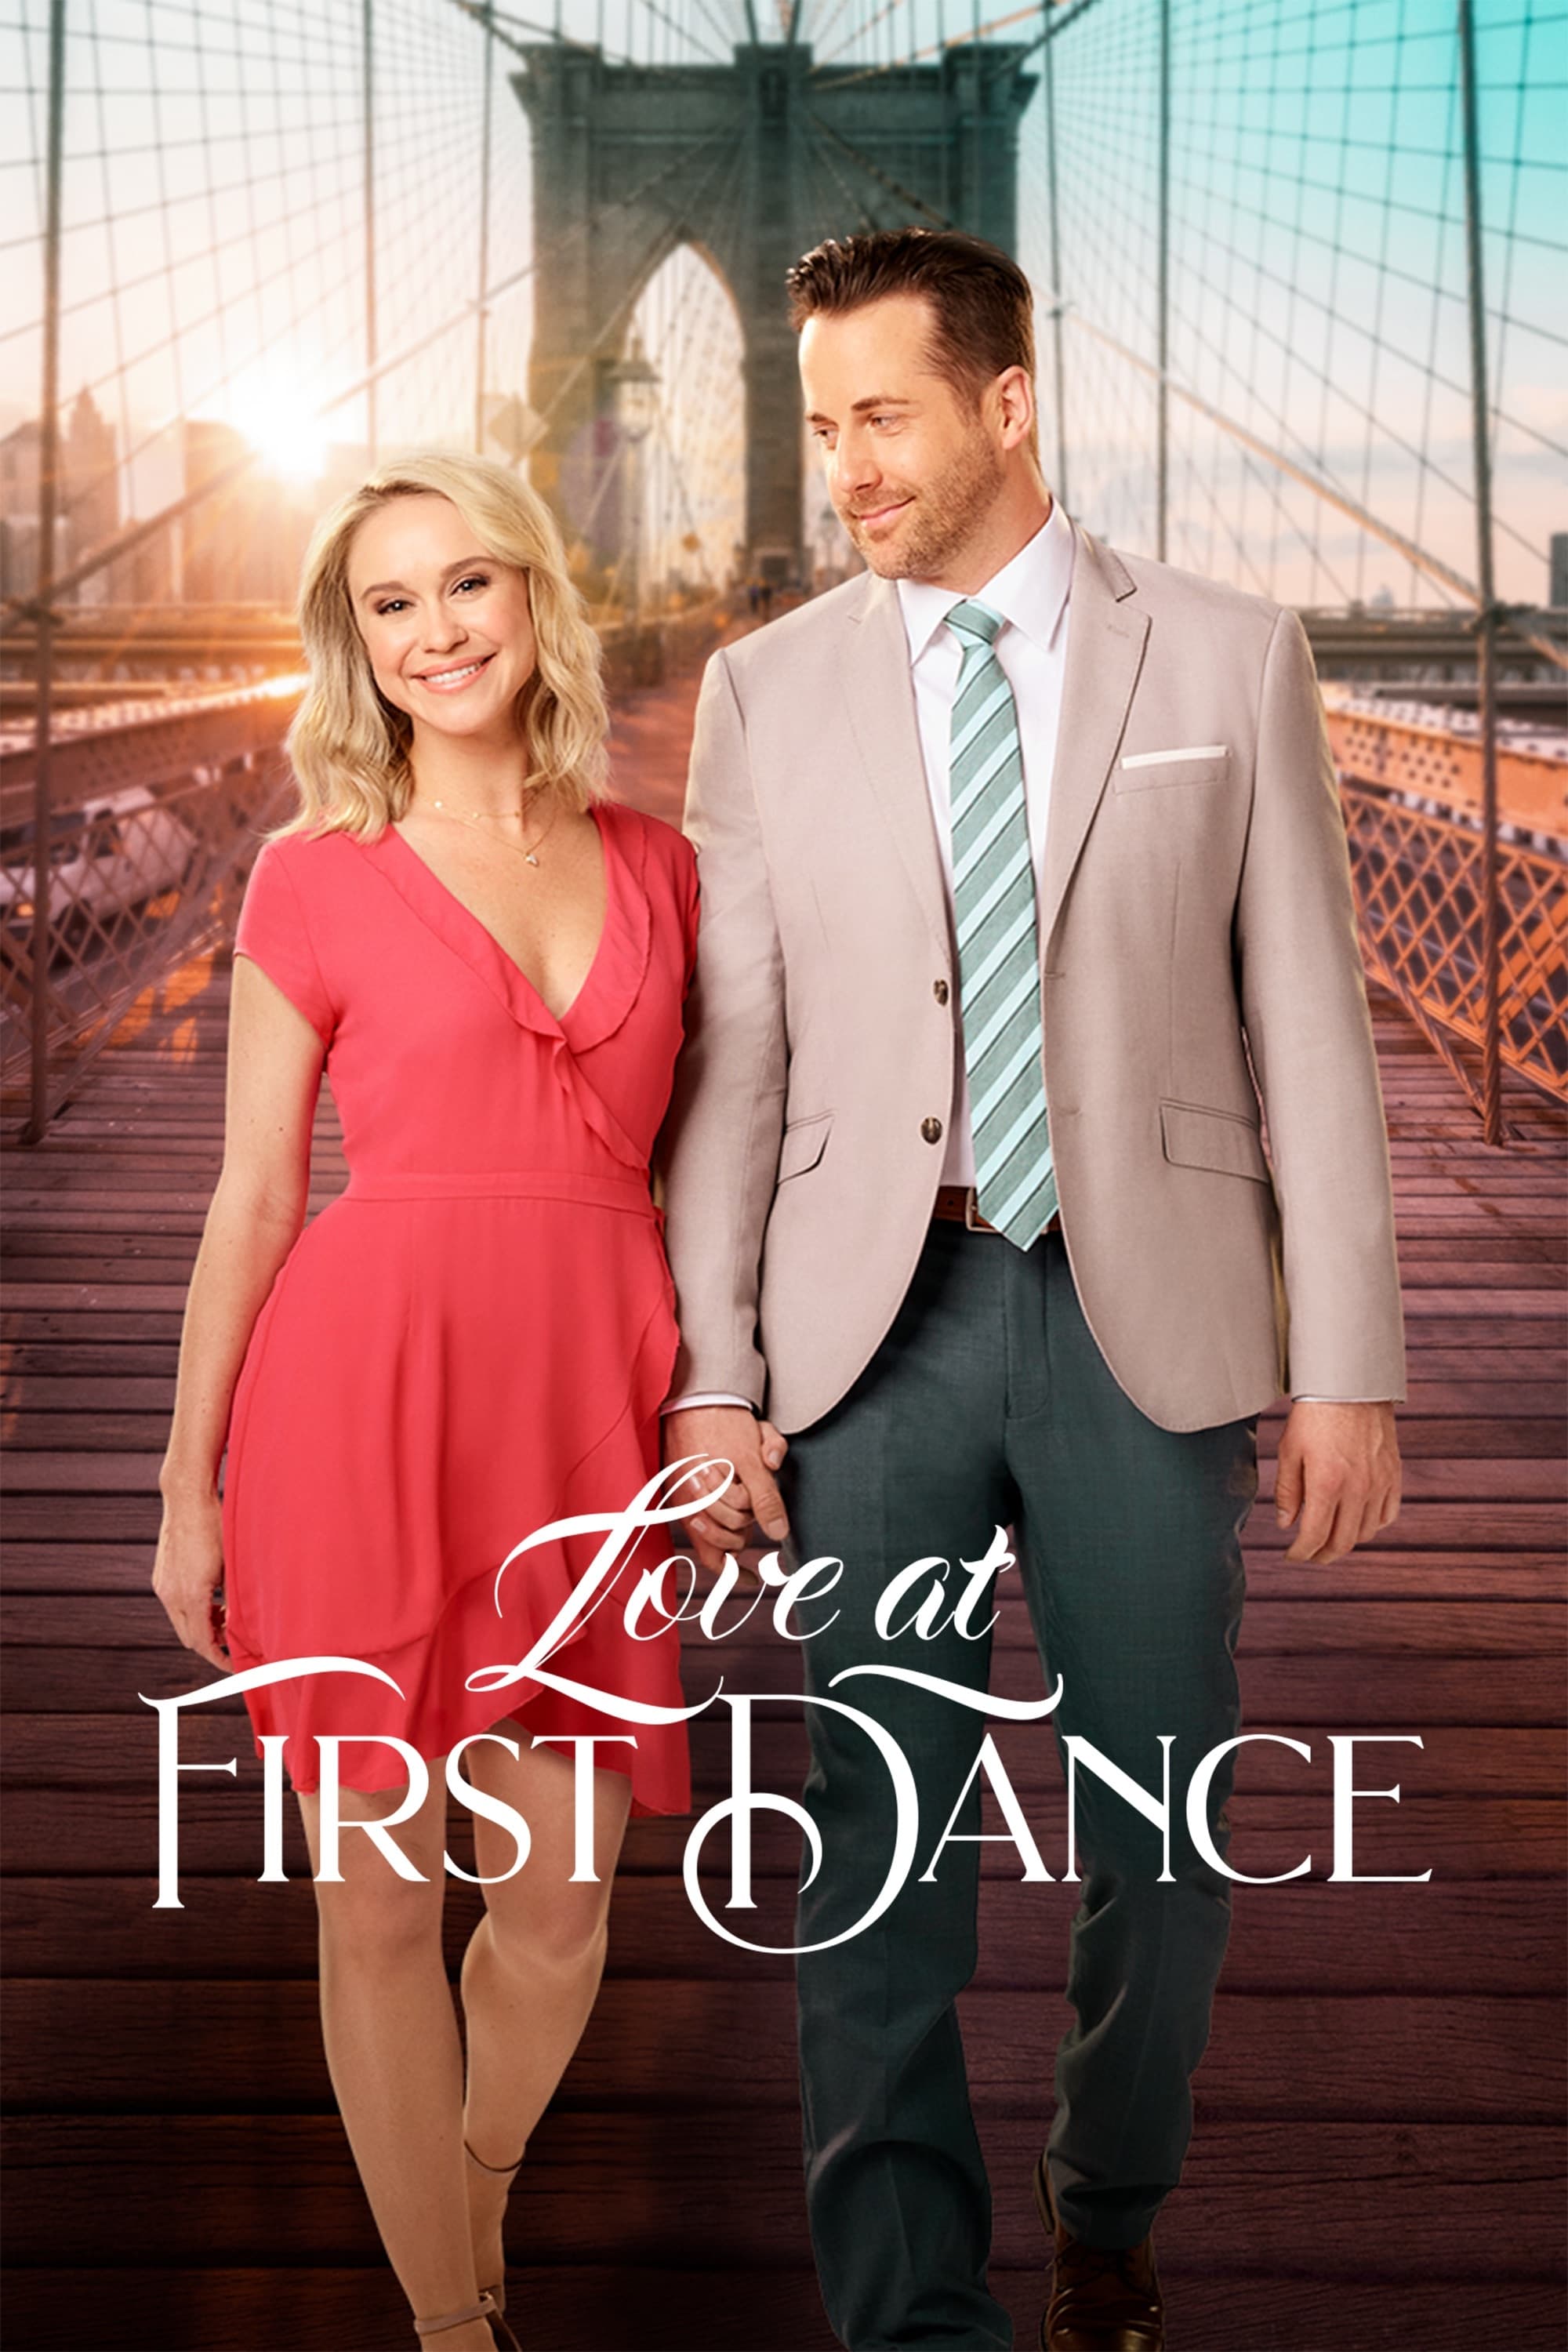 Love at First Dance (2018)